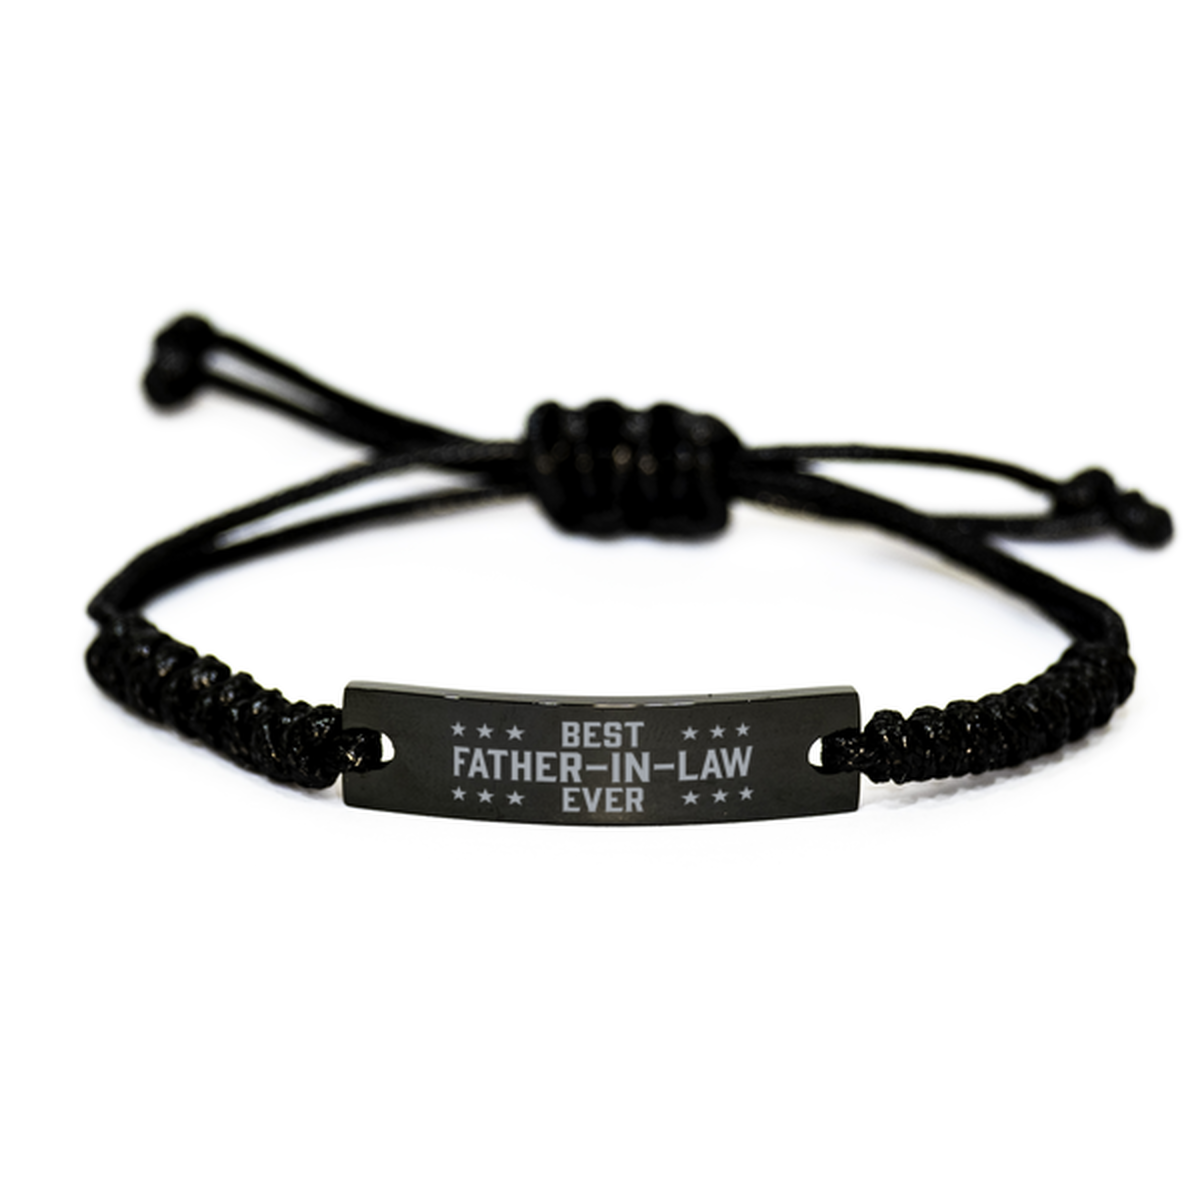 Best Father-in-law Ever Father-in-law Gifts, Funny Engraved Rope Bracelet For Father-in-law, Birthday Family Gifts For Men